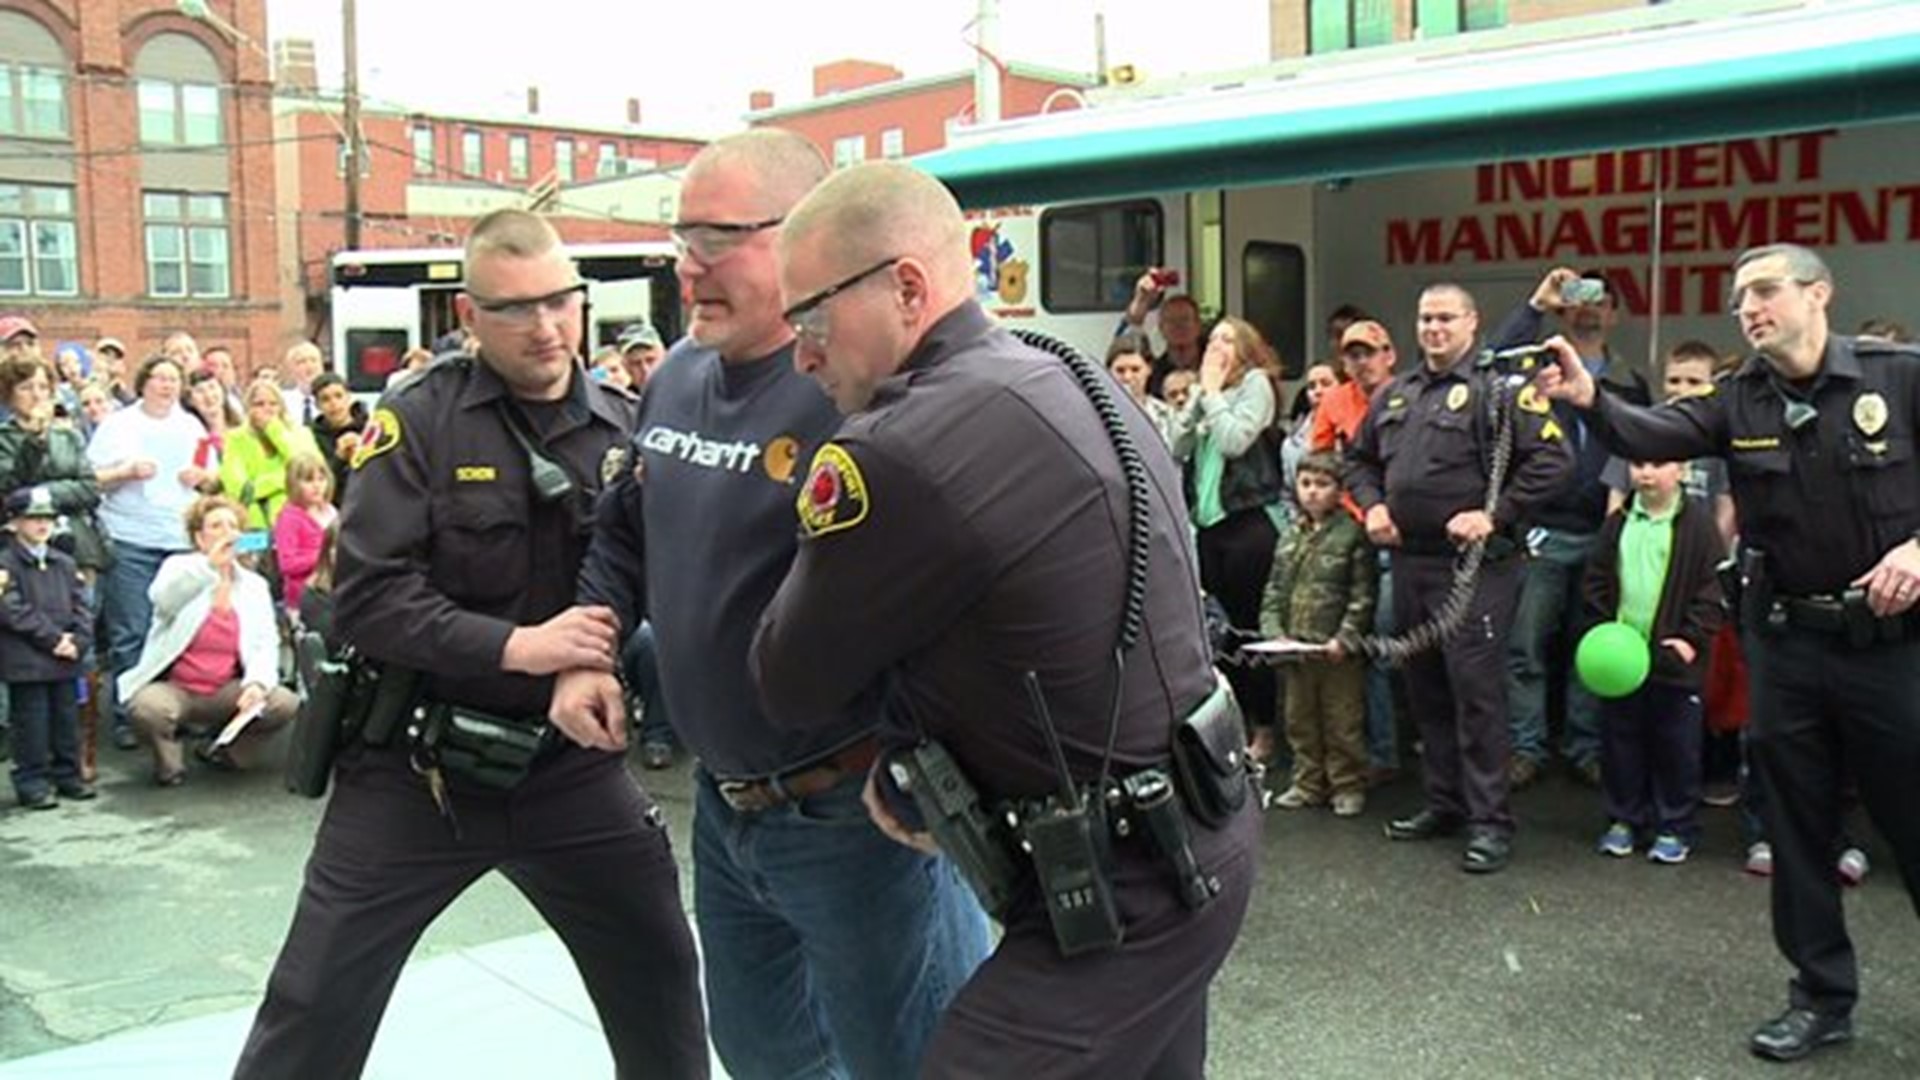 Williamsport Police Hold Open House To Improve Community Relations